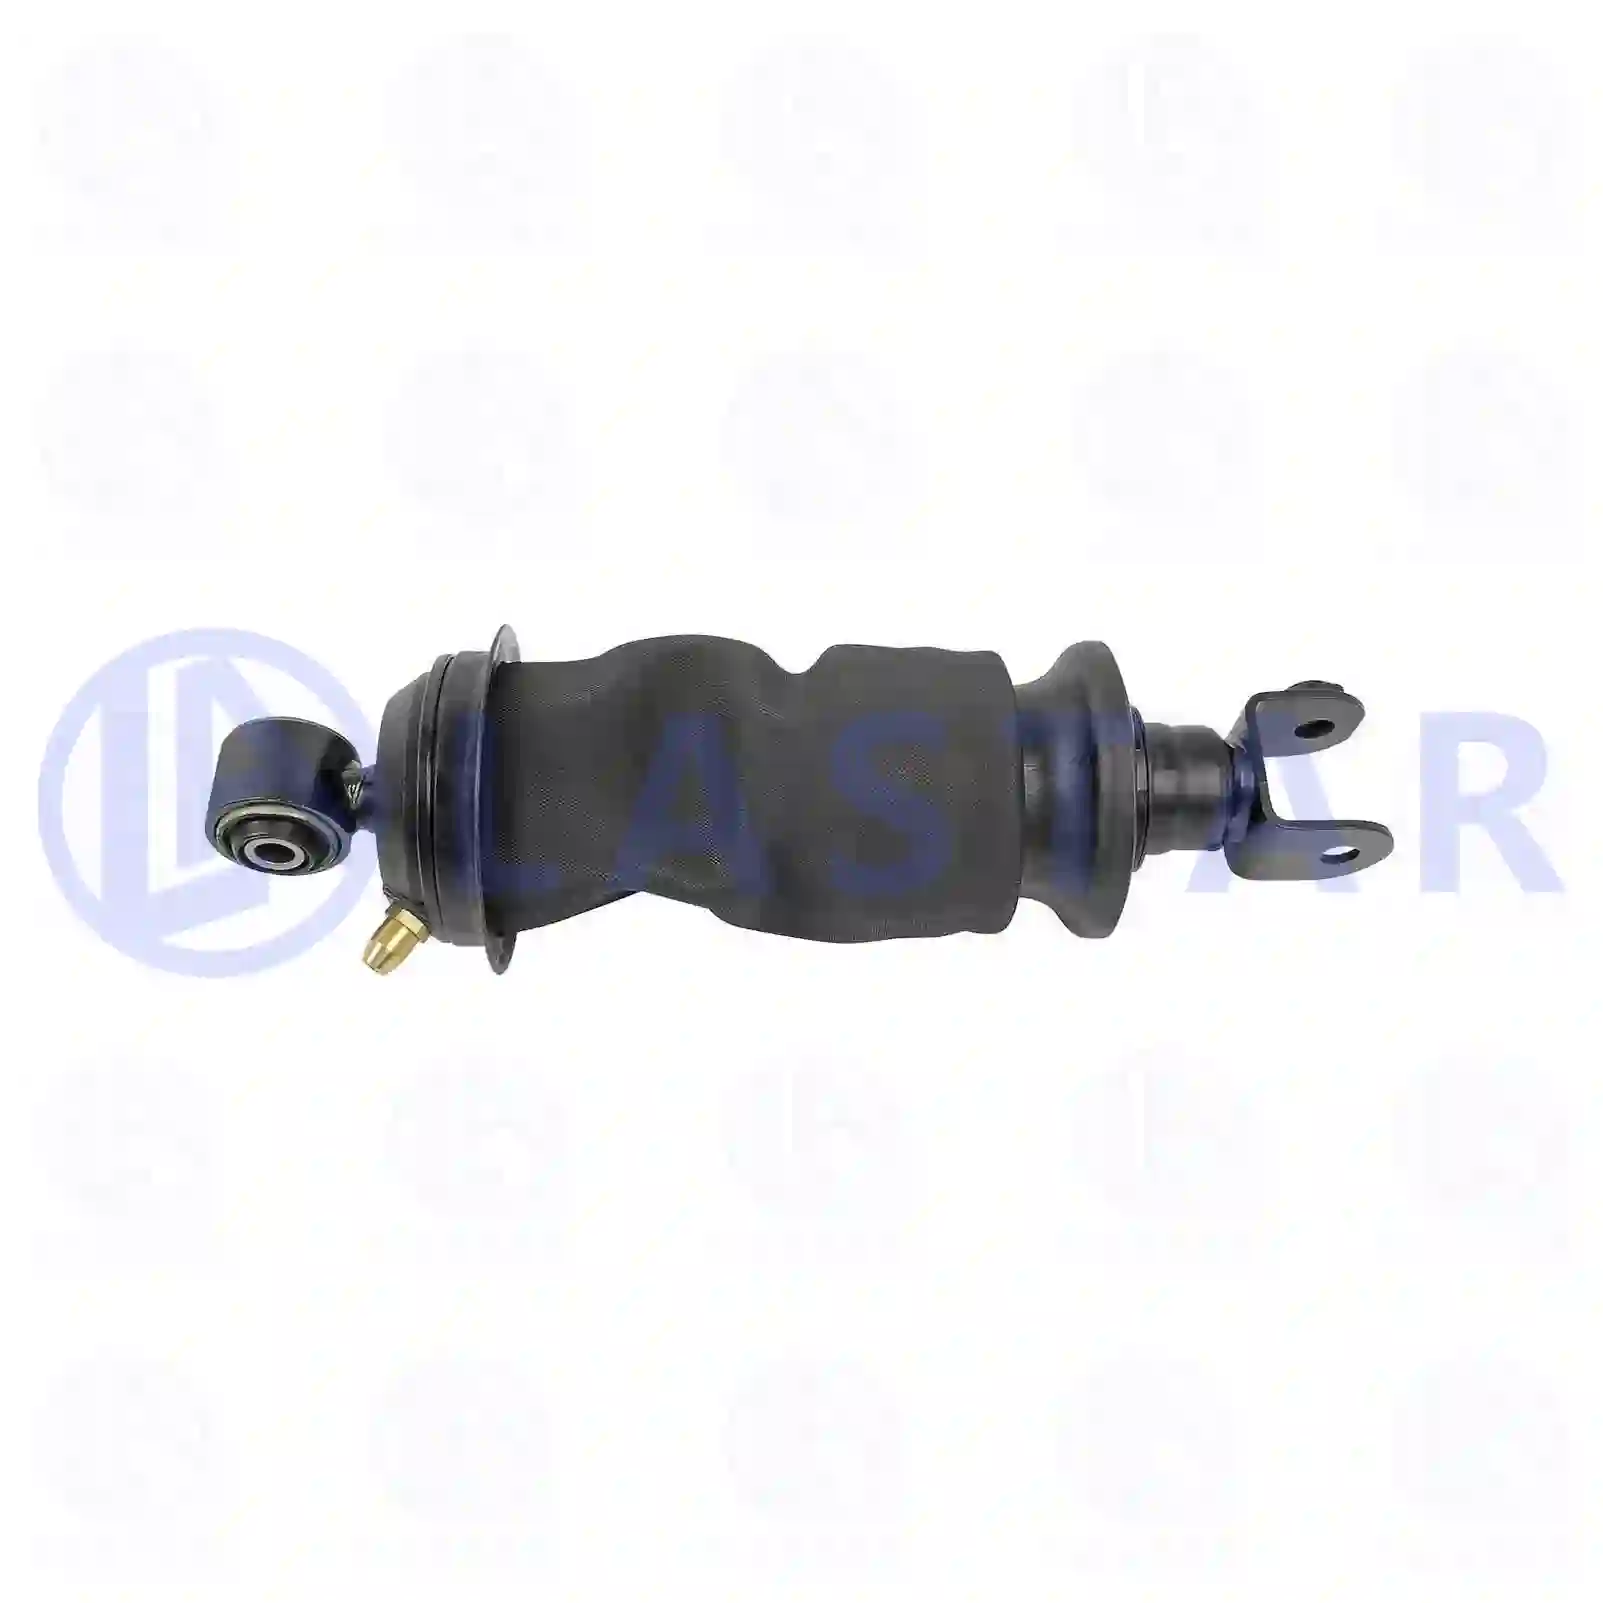 Cabin shock absorber, with air bellow, 77735334, 1908097, 2493165, , , , ||  77735334 Lastar Spare Part | Truck Spare Parts, Auotomotive Spare Parts Cabin shock absorber, with air bellow, 77735334, 1908097, 2493165, , , , ||  77735334 Lastar Spare Part | Truck Spare Parts, Auotomotive Spare Parts